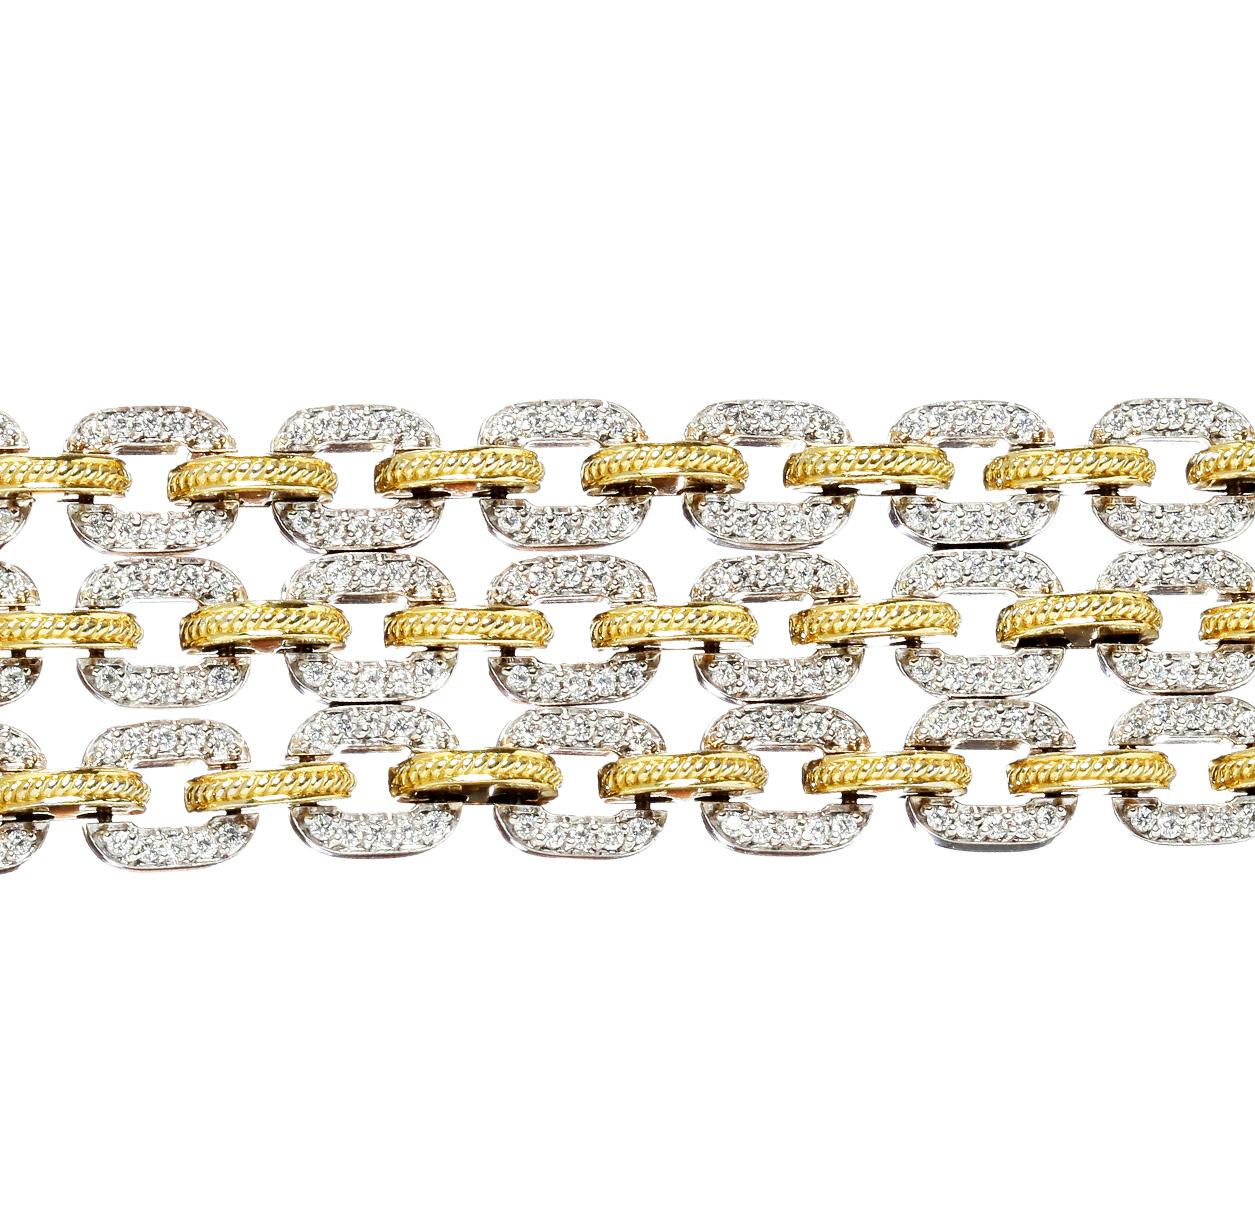 Stambolian 18 Karat Yellow White Two-Tone Gold and Diamond Three Link Bracelet

This stunning bracelet features 5.02 carat G color VS clarity diamonds all throughout

Bracelet is 7 inches in length and uses the push-button tongue clasp

Signed